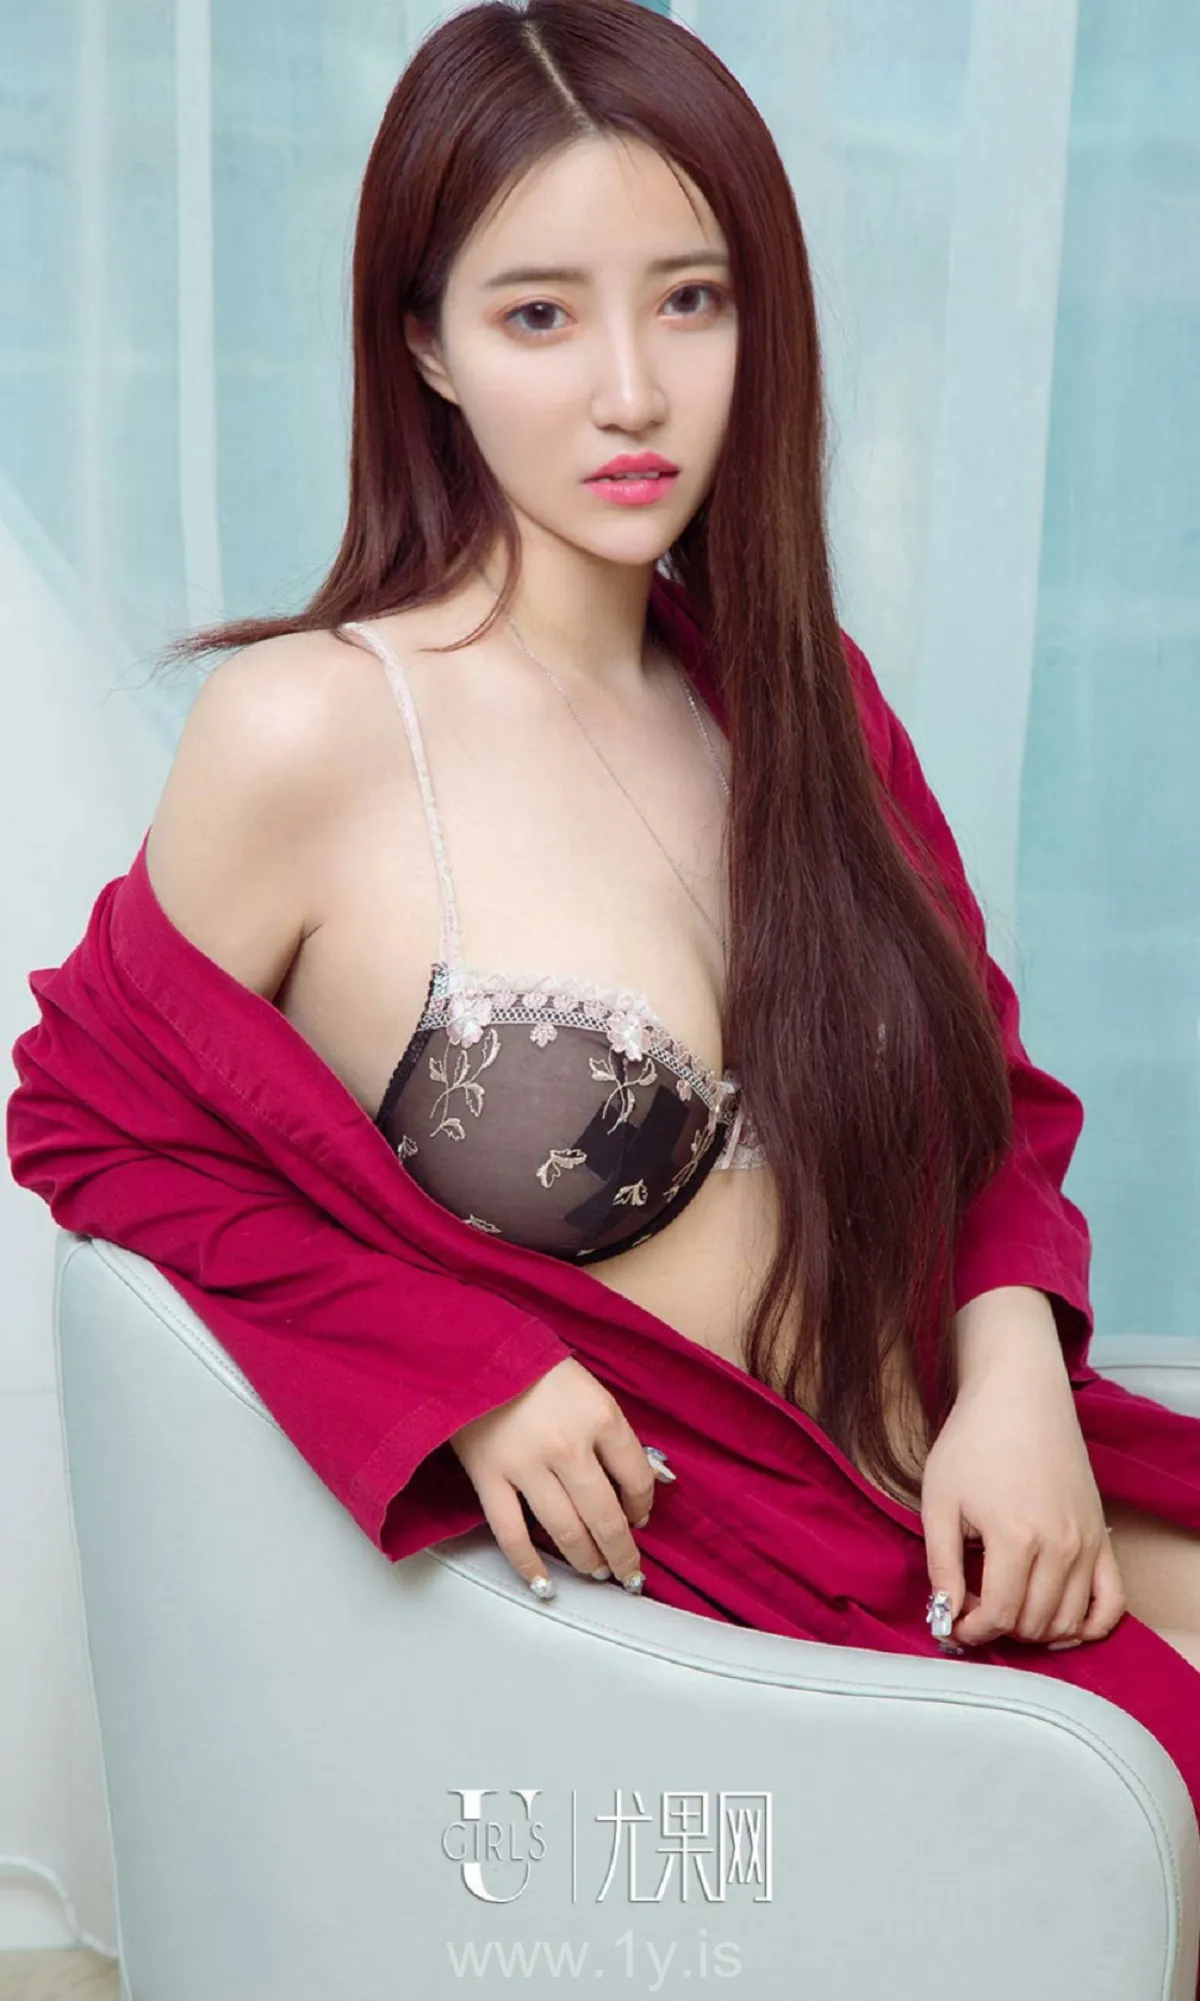 UGIRLS NO.729 Charming & Attractive Chinese Babe 沐若昕